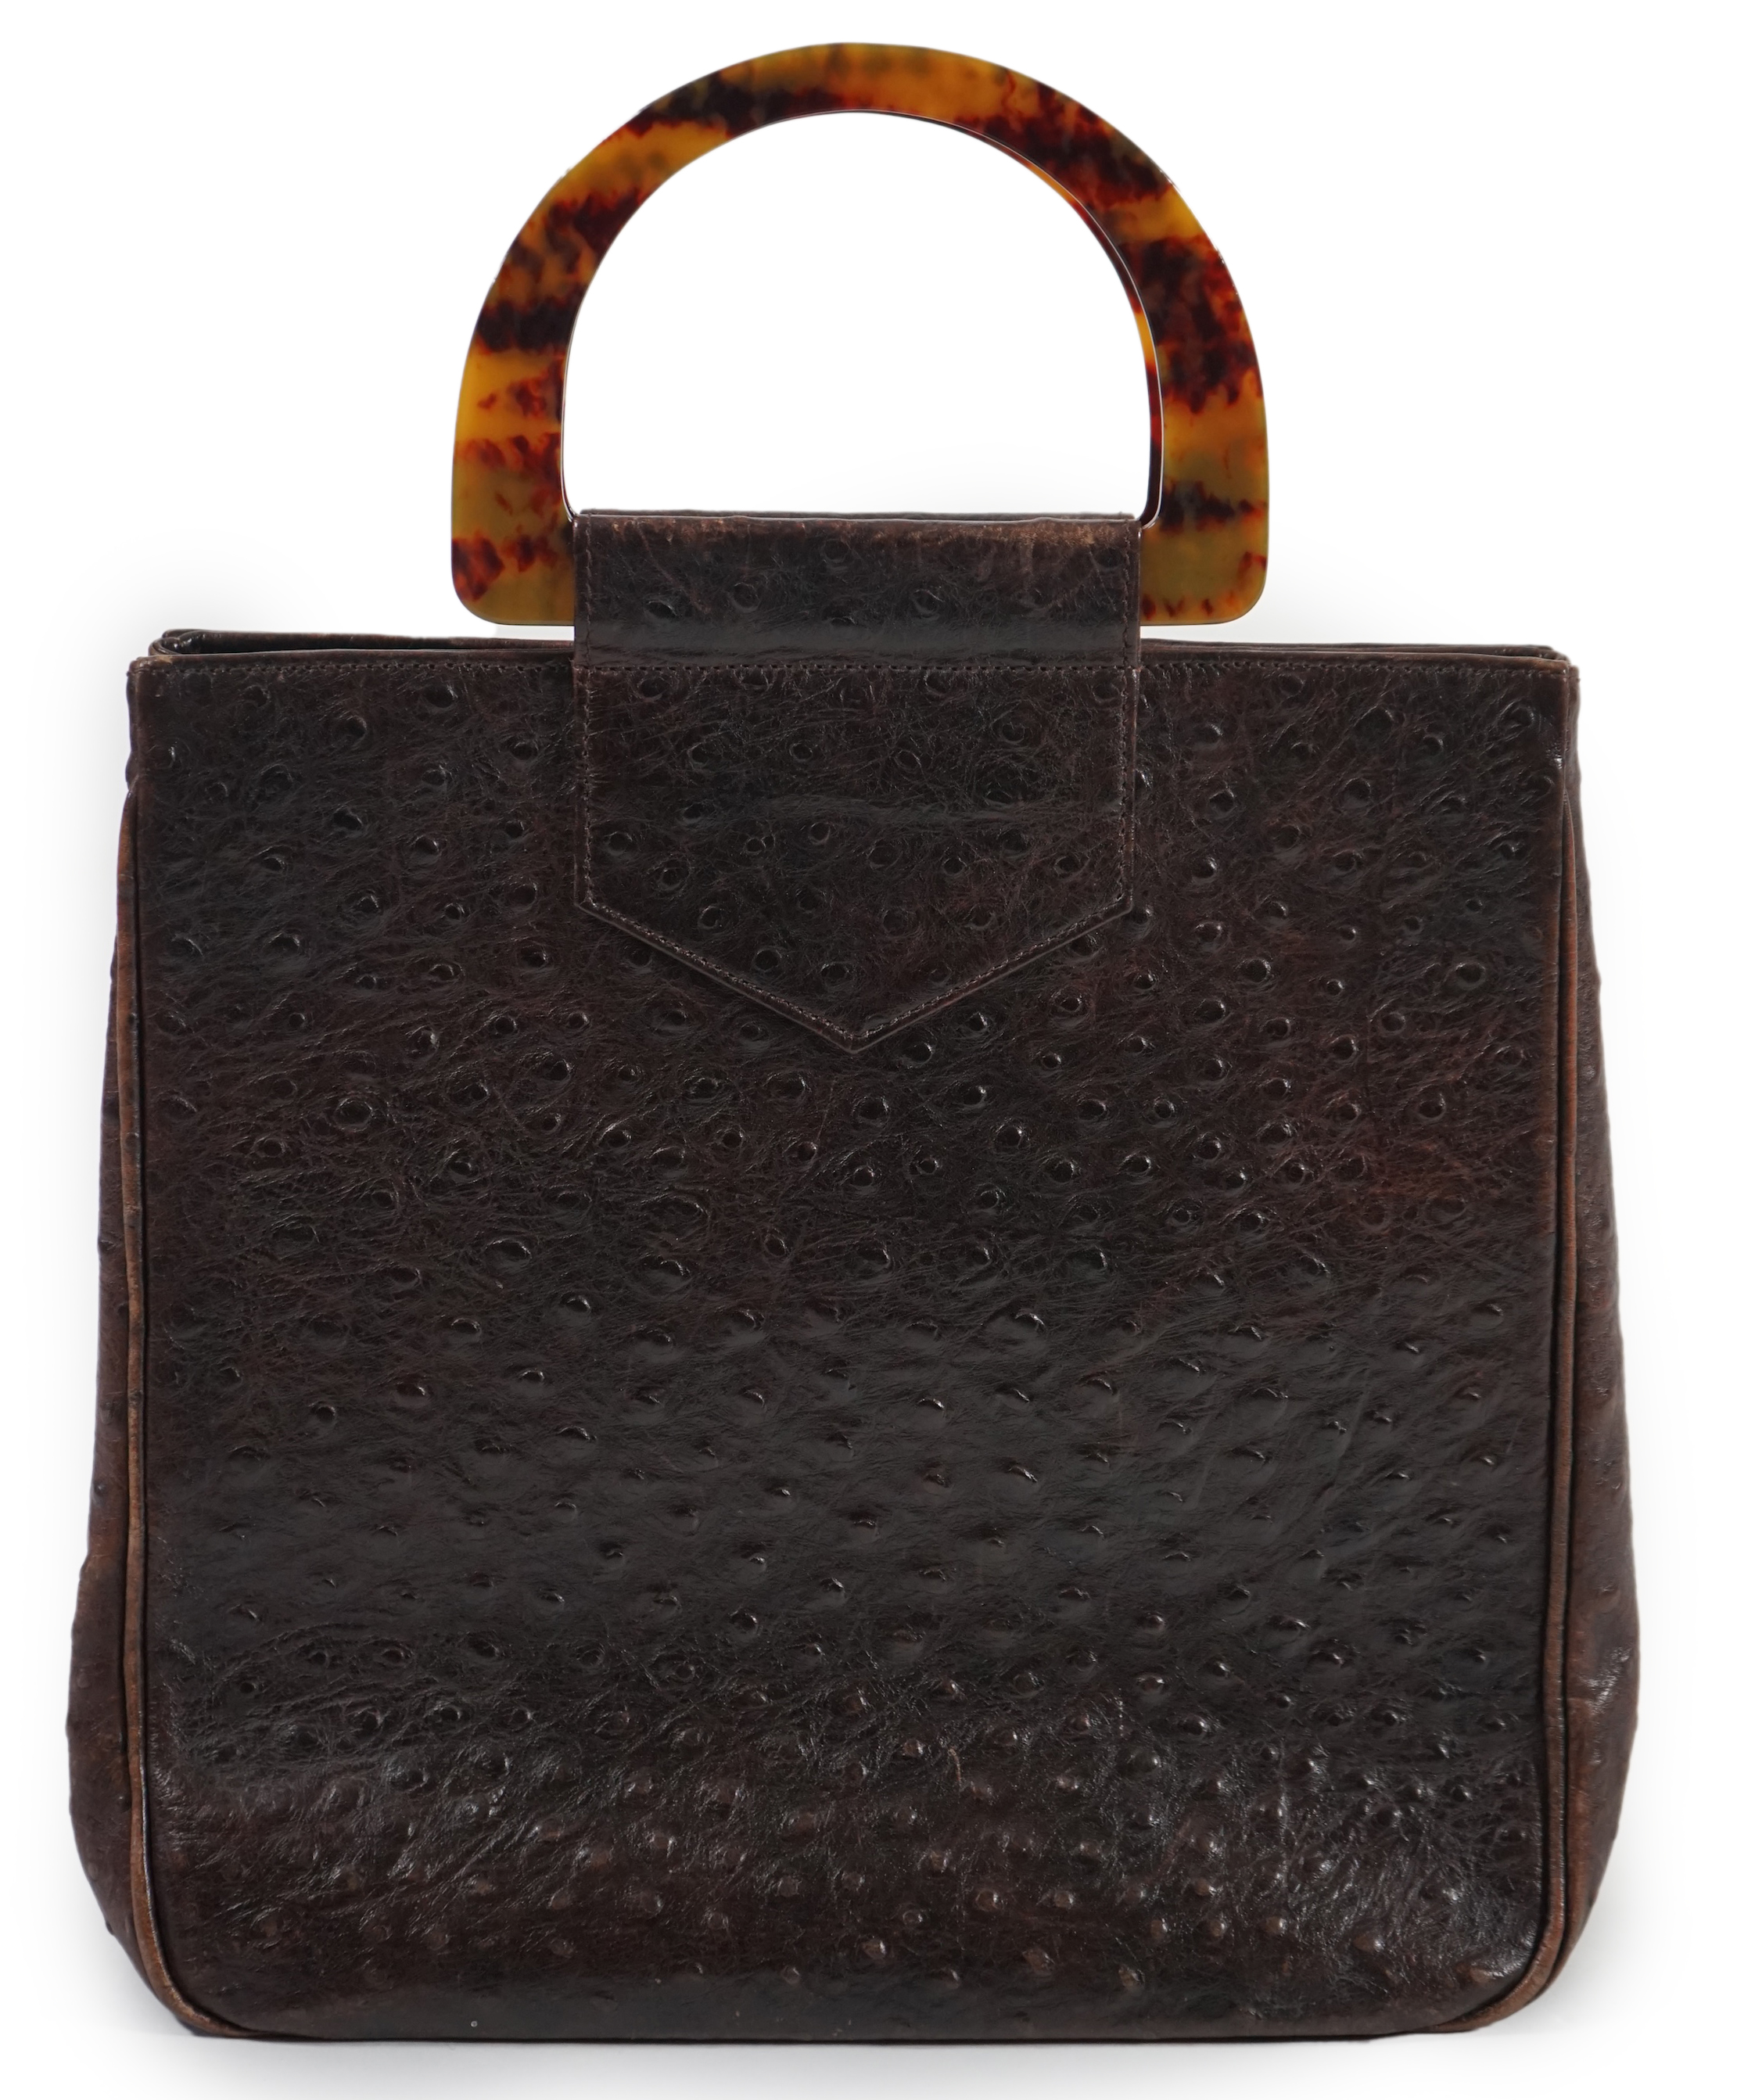 A brown Yves Saint Laurent handbag with faux tortoiseshell handles, ostrich leather with interior zip pocket